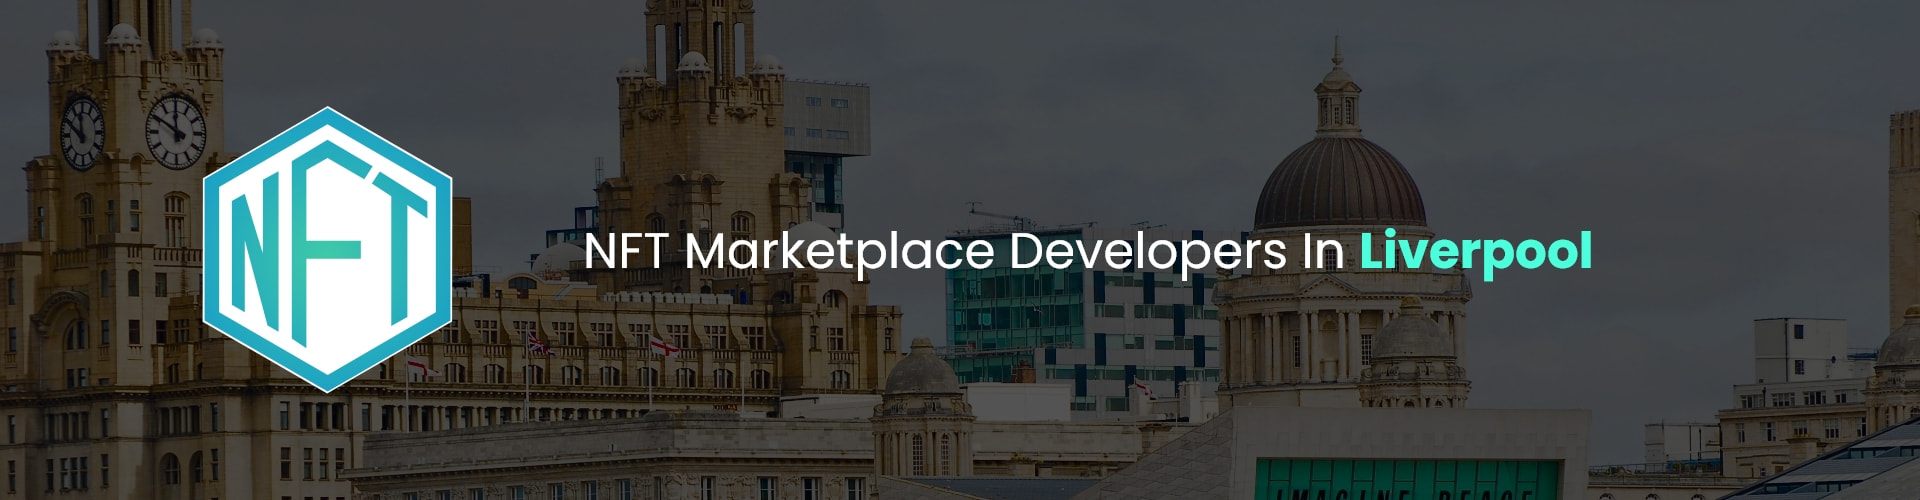 hire nft marketplace developers in liverpool